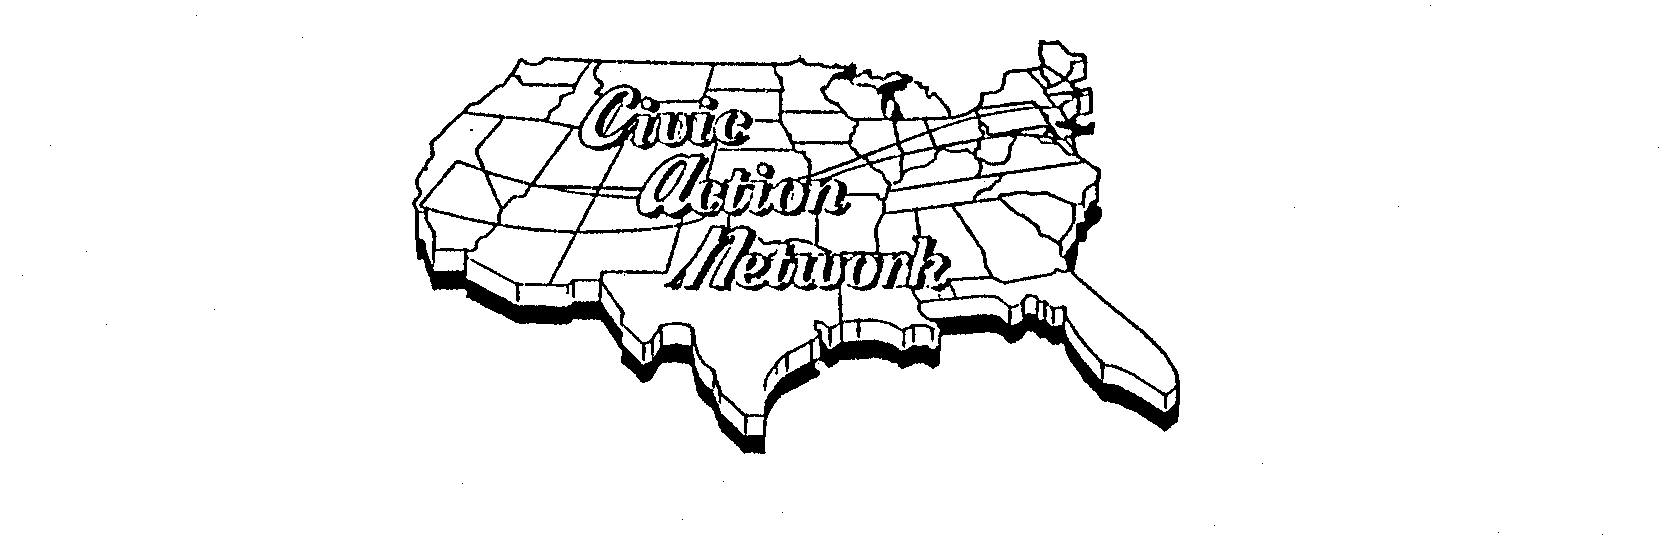  CIVIC ACTION NETWORK